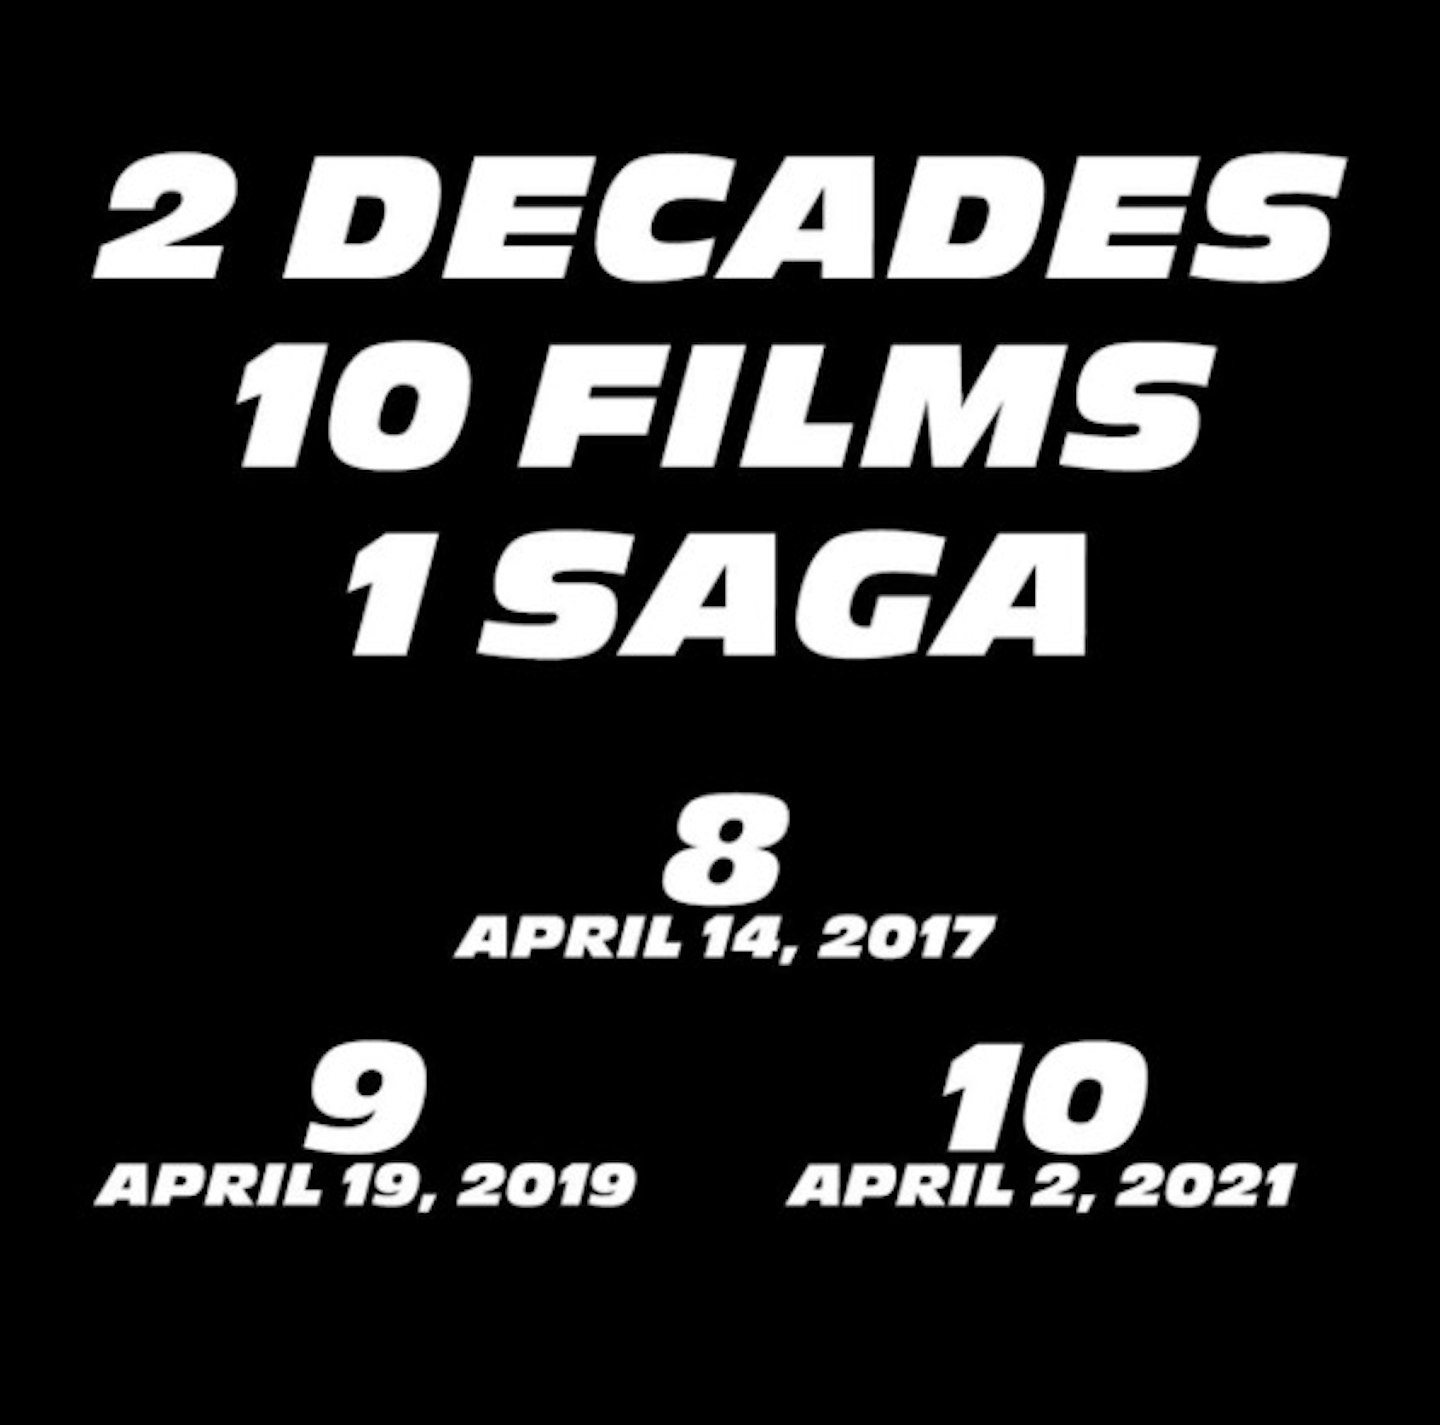 Release dates for Fast & Furious 9 and 10